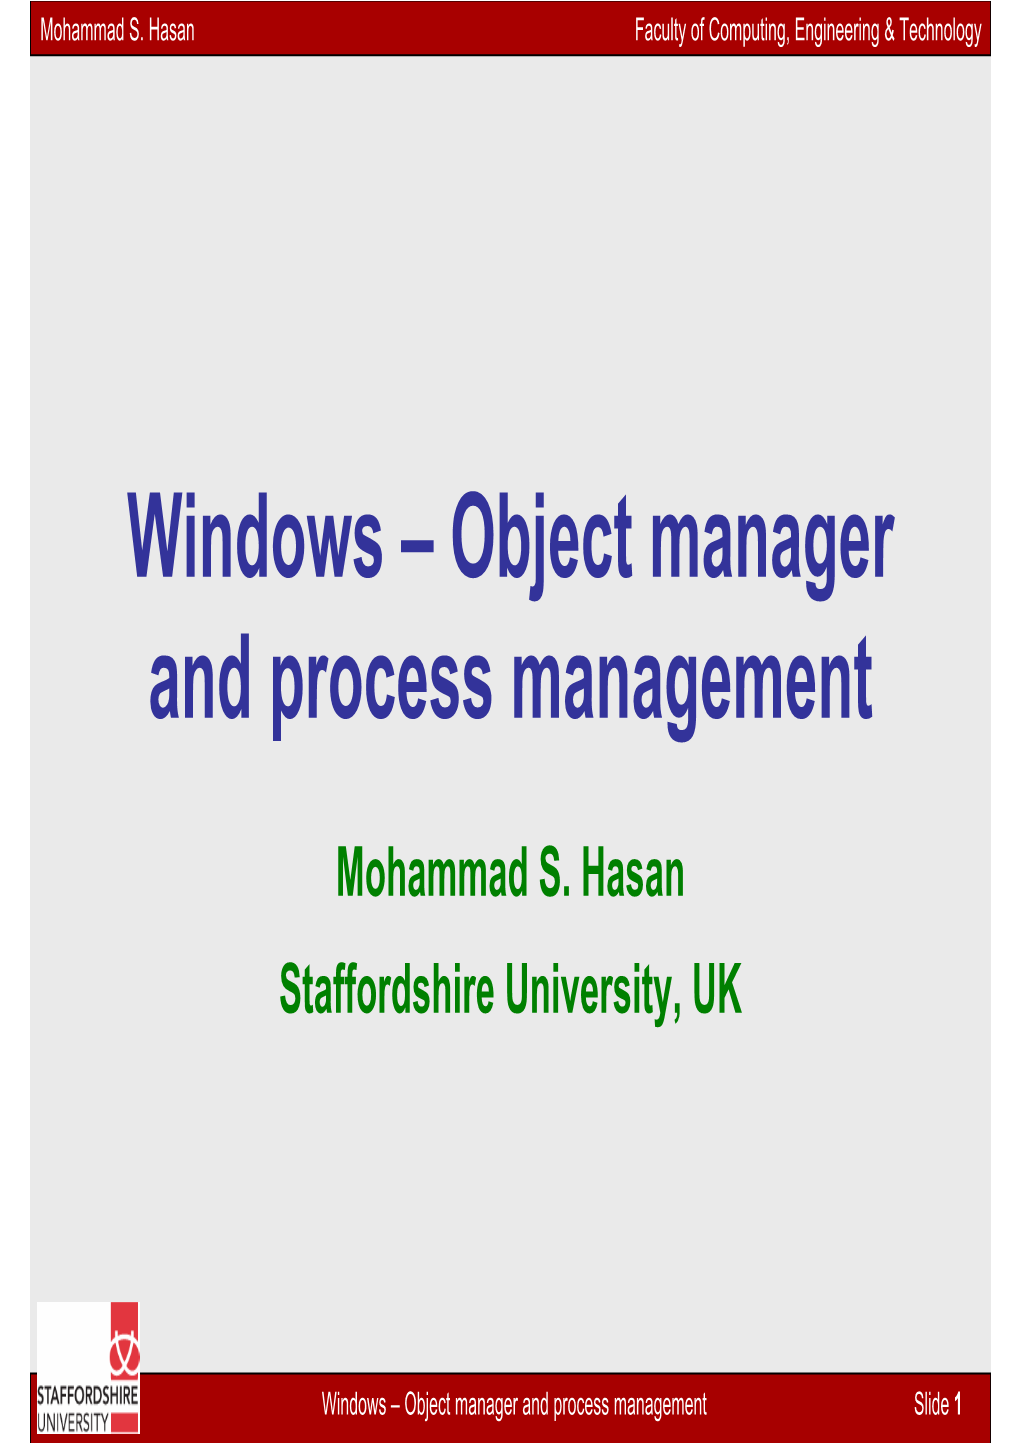 Windows – Object Manager and Process Management